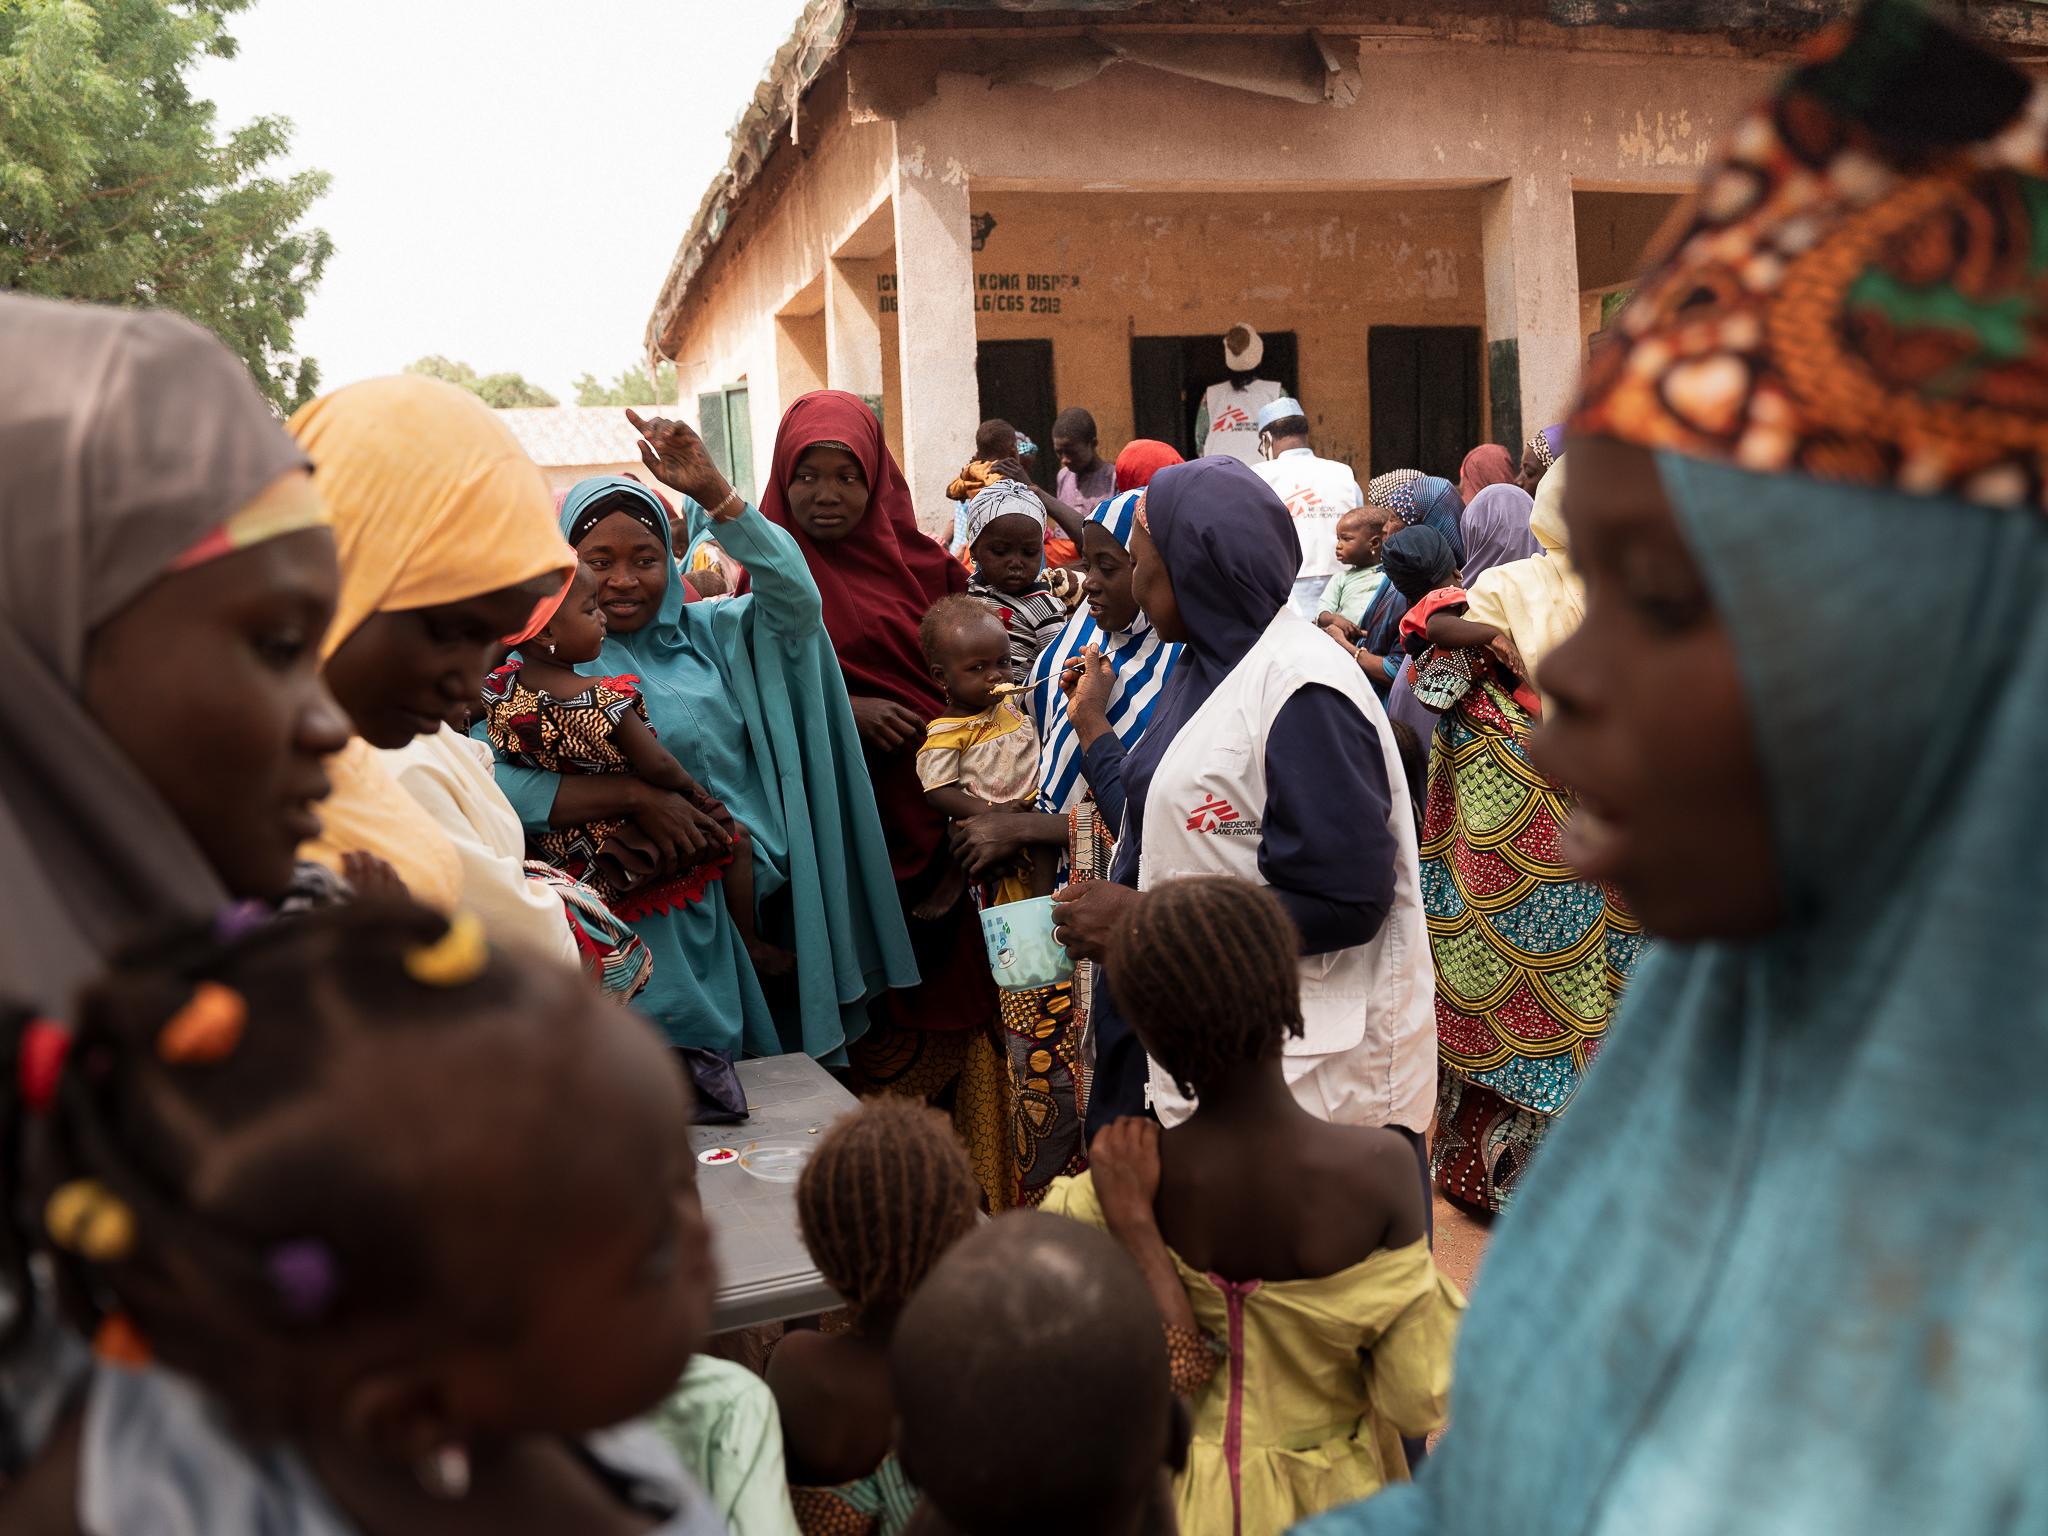 Recipes for Life: How Cooking Classes Help Reduce Child Malnutrition in Northern Nigeria